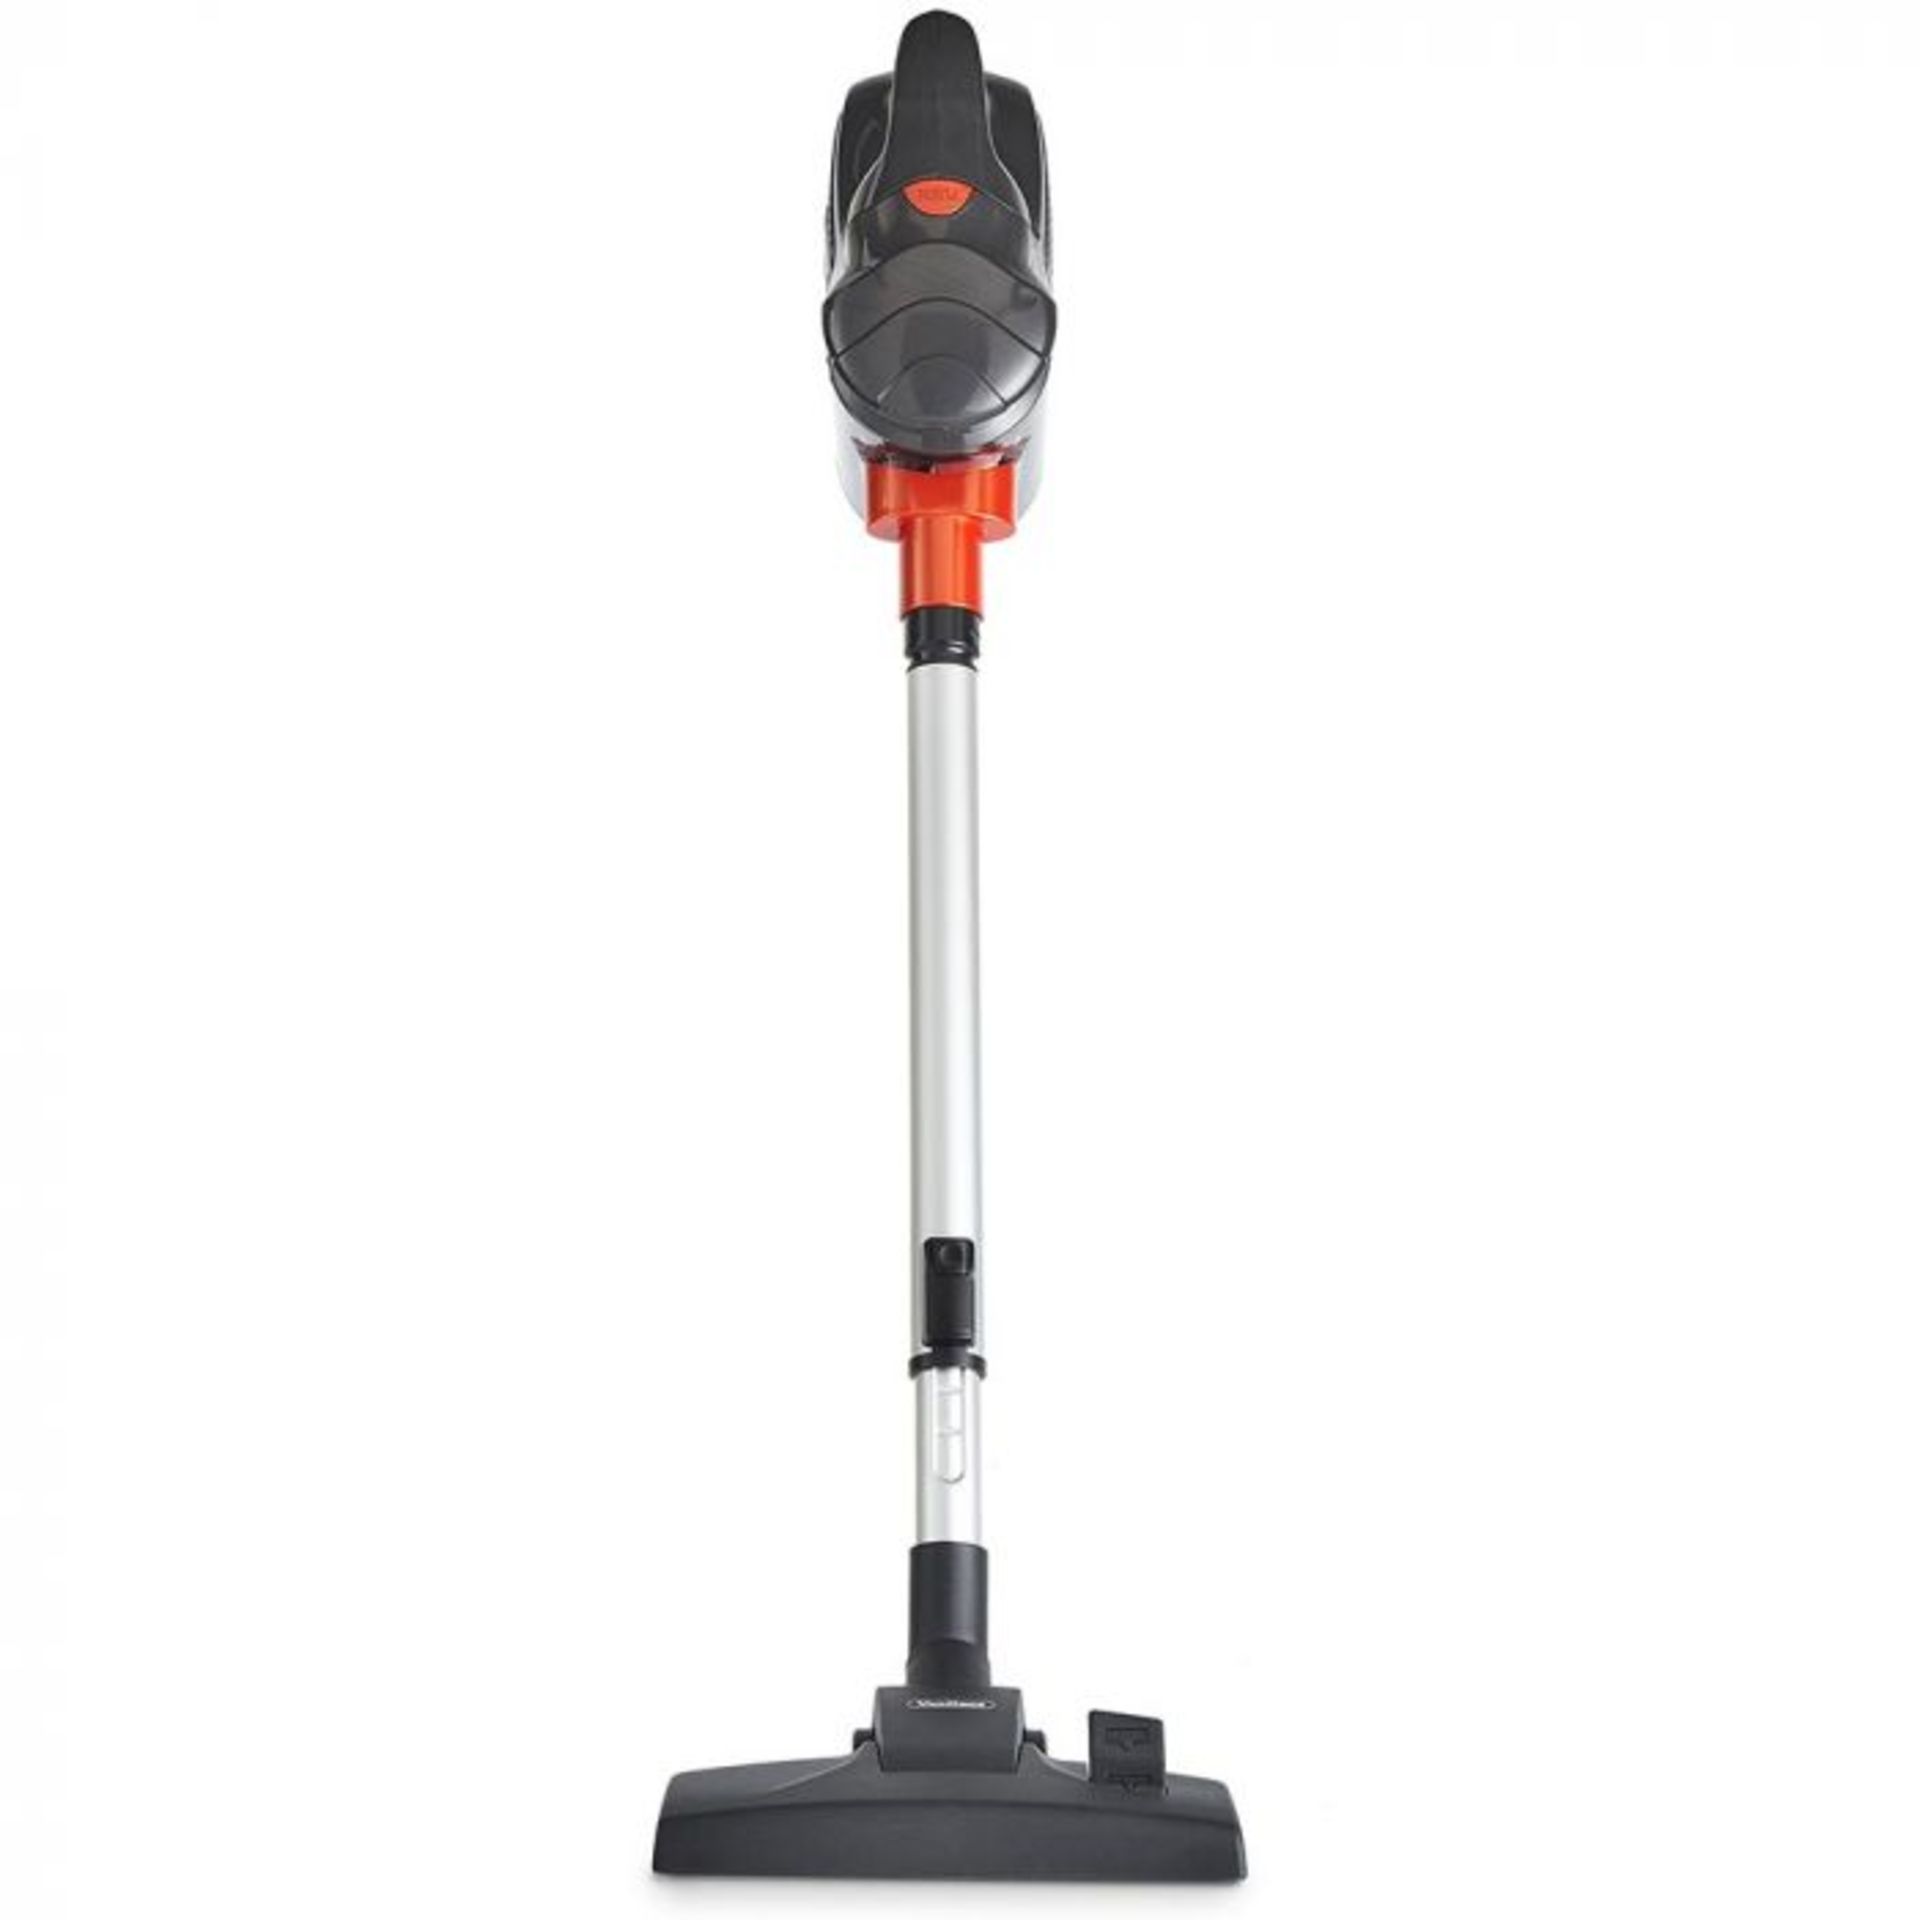 (S5) Corded Stick Vacuum Cleaner 600W Floor to ceiling cleaning power – effortlessly switch ... - Image 3 of 3